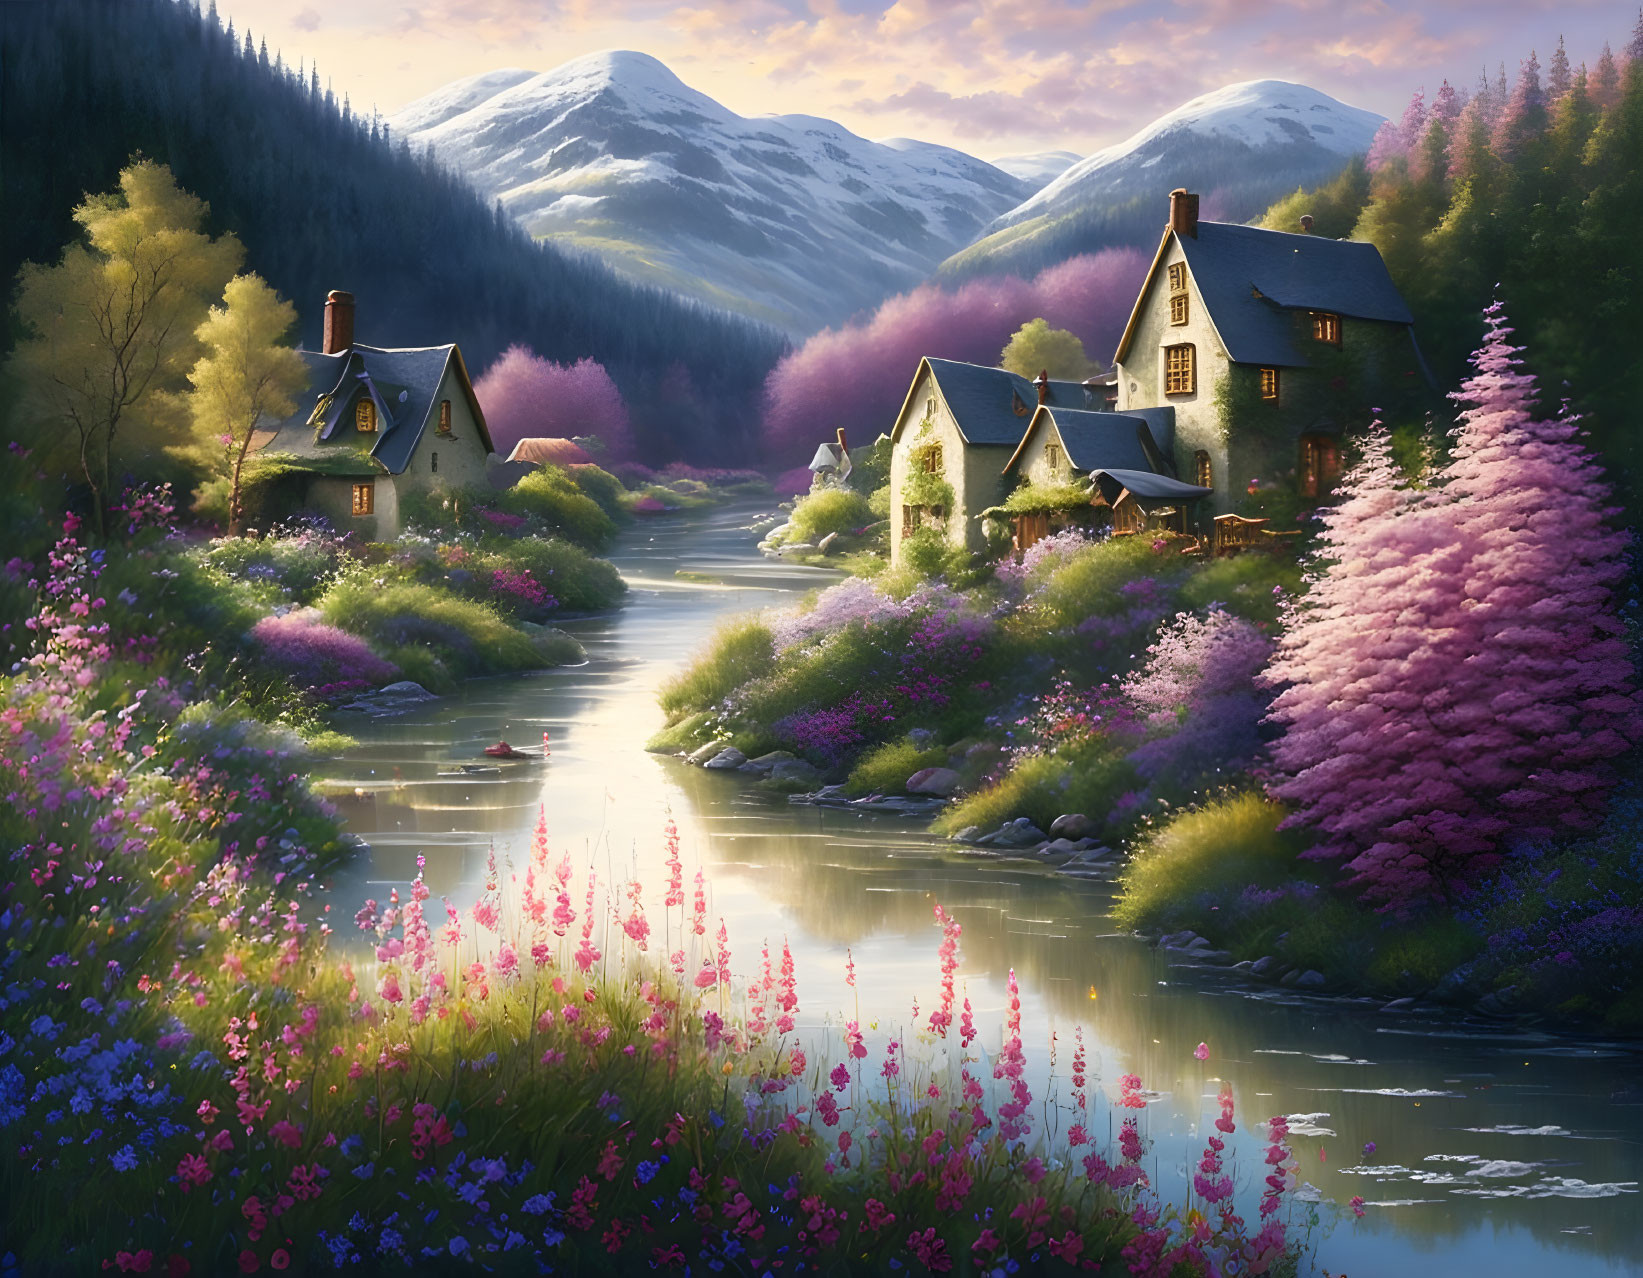 Picturesque village with thatched-roof cottages, river, flowering trees, and mountains at dusk